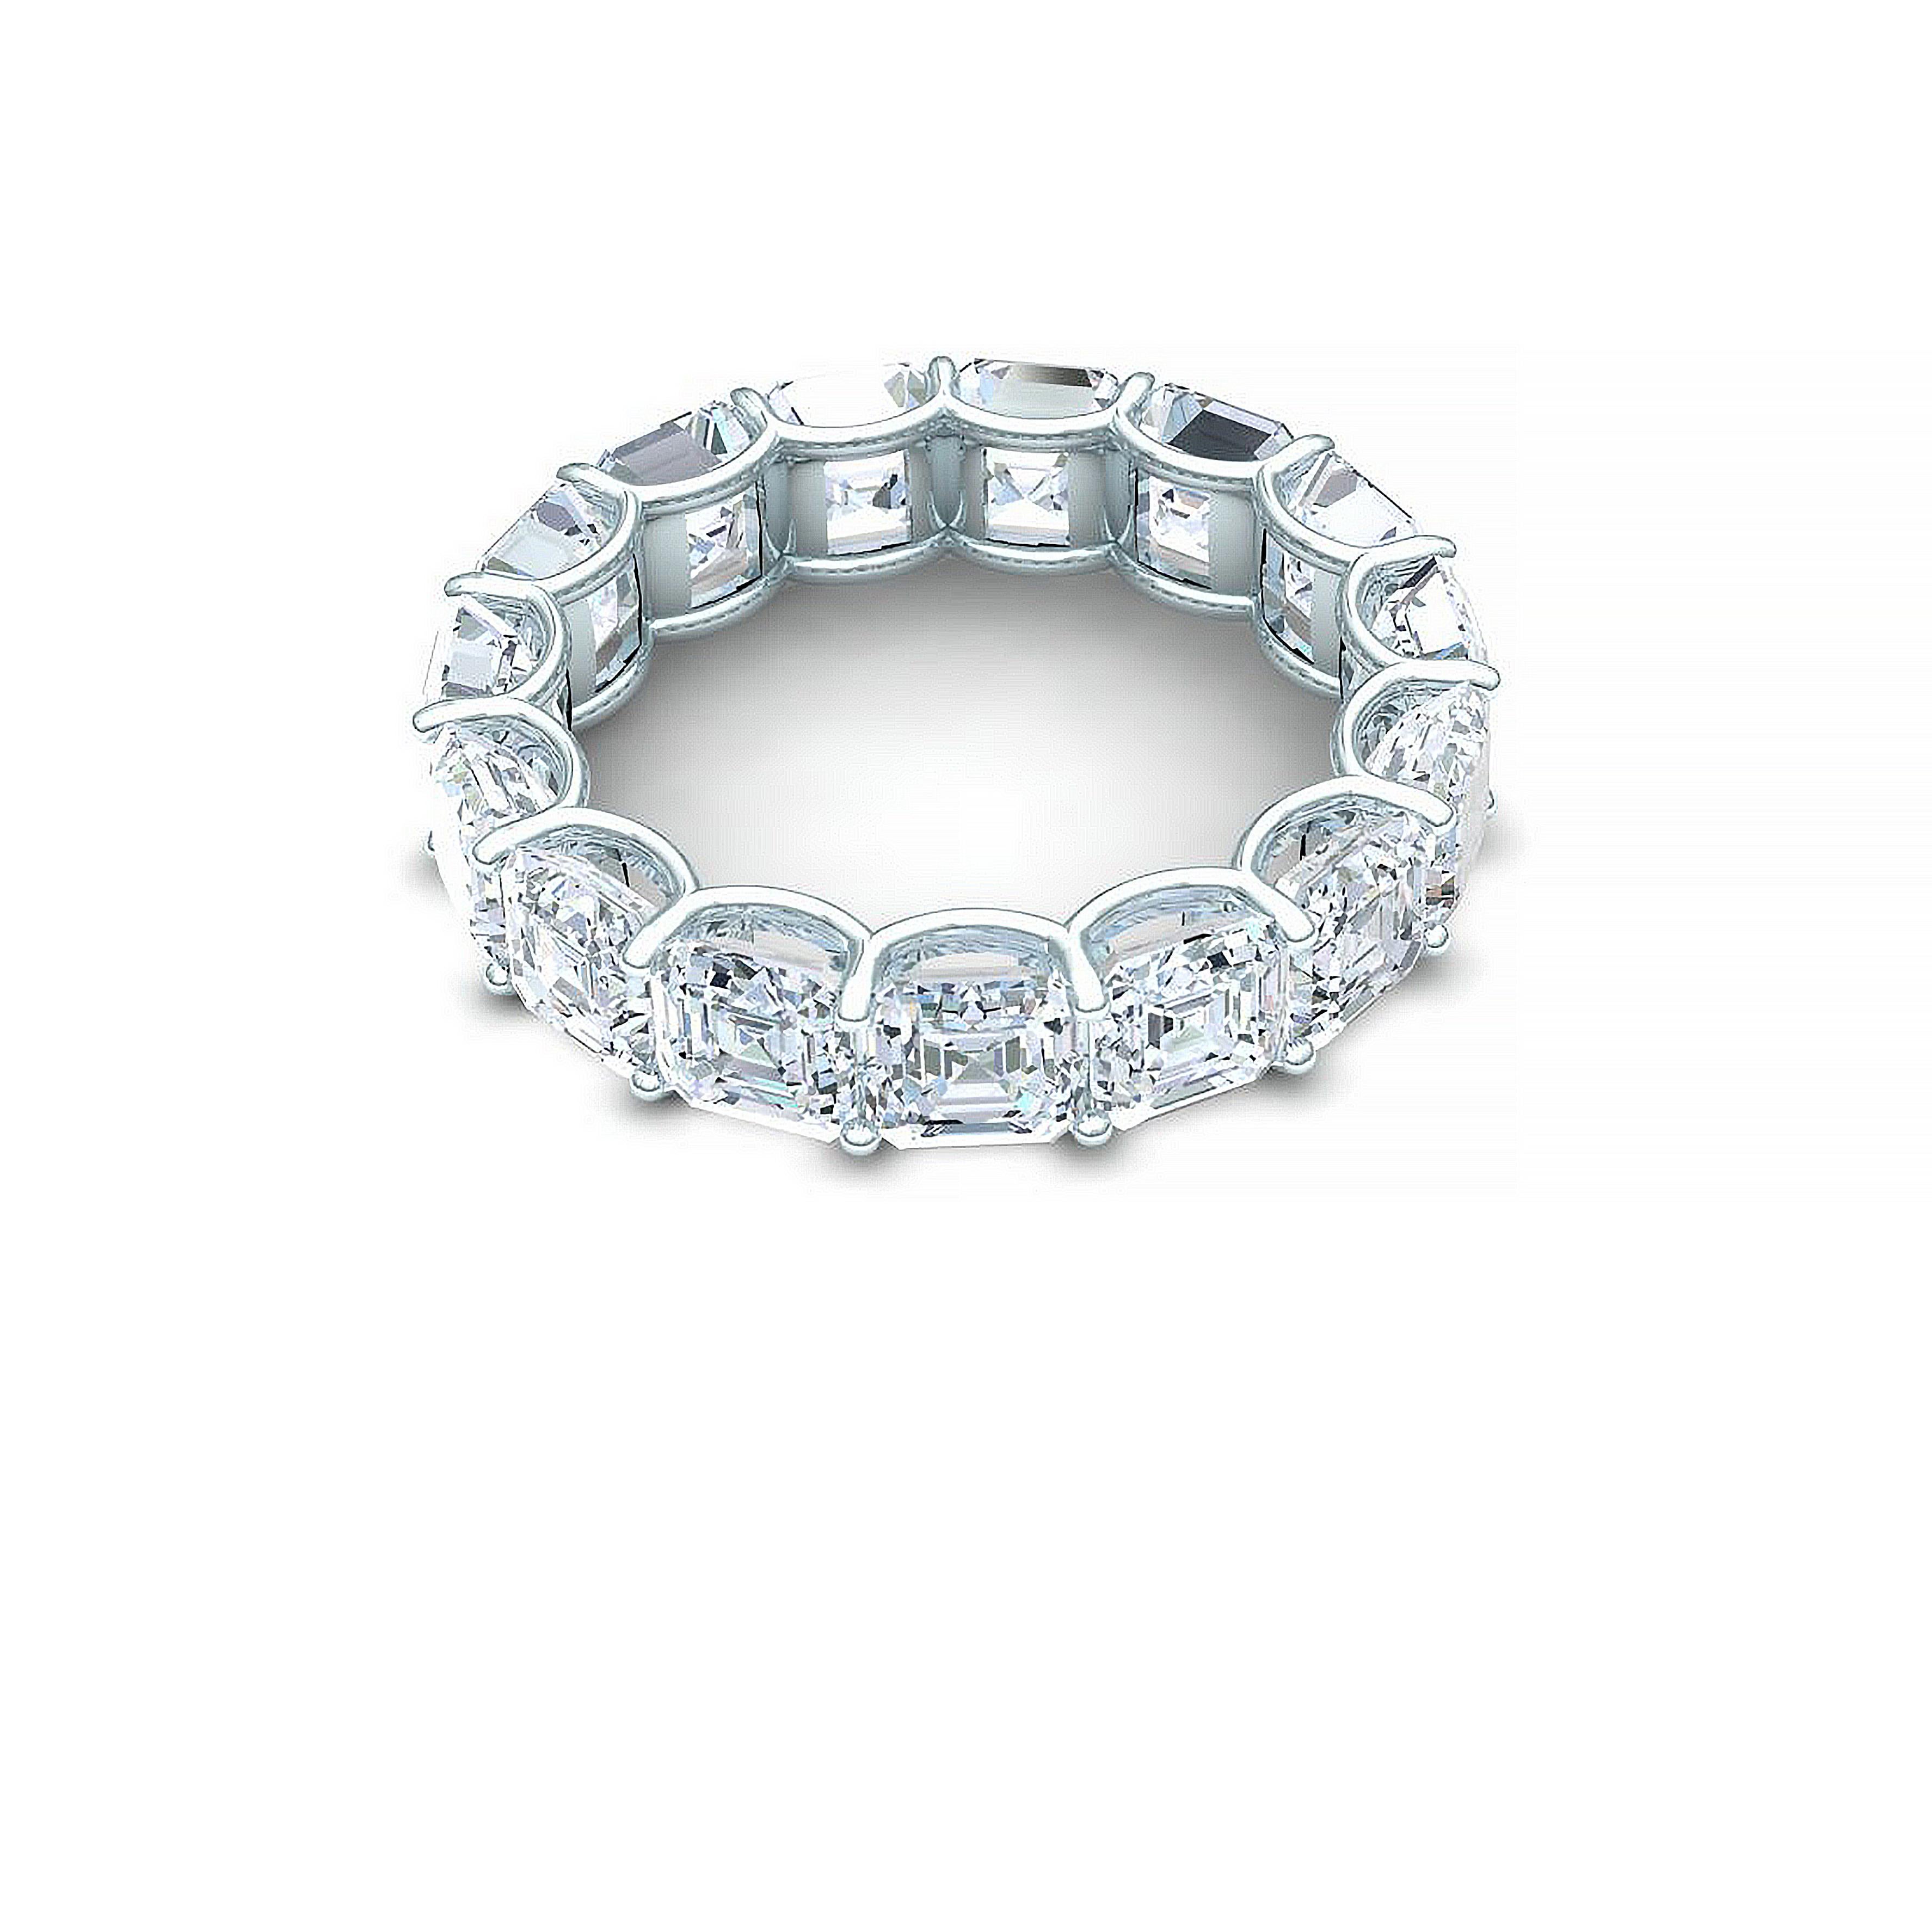 This classic and stunning eternity band consist of the following.  There are 15 Asscher cut diamonds which exhibit a color and clarity of H-I VS and measure between 4.3-4.5 mm each.  Each diamond is expertly set by our master jeweler in 950